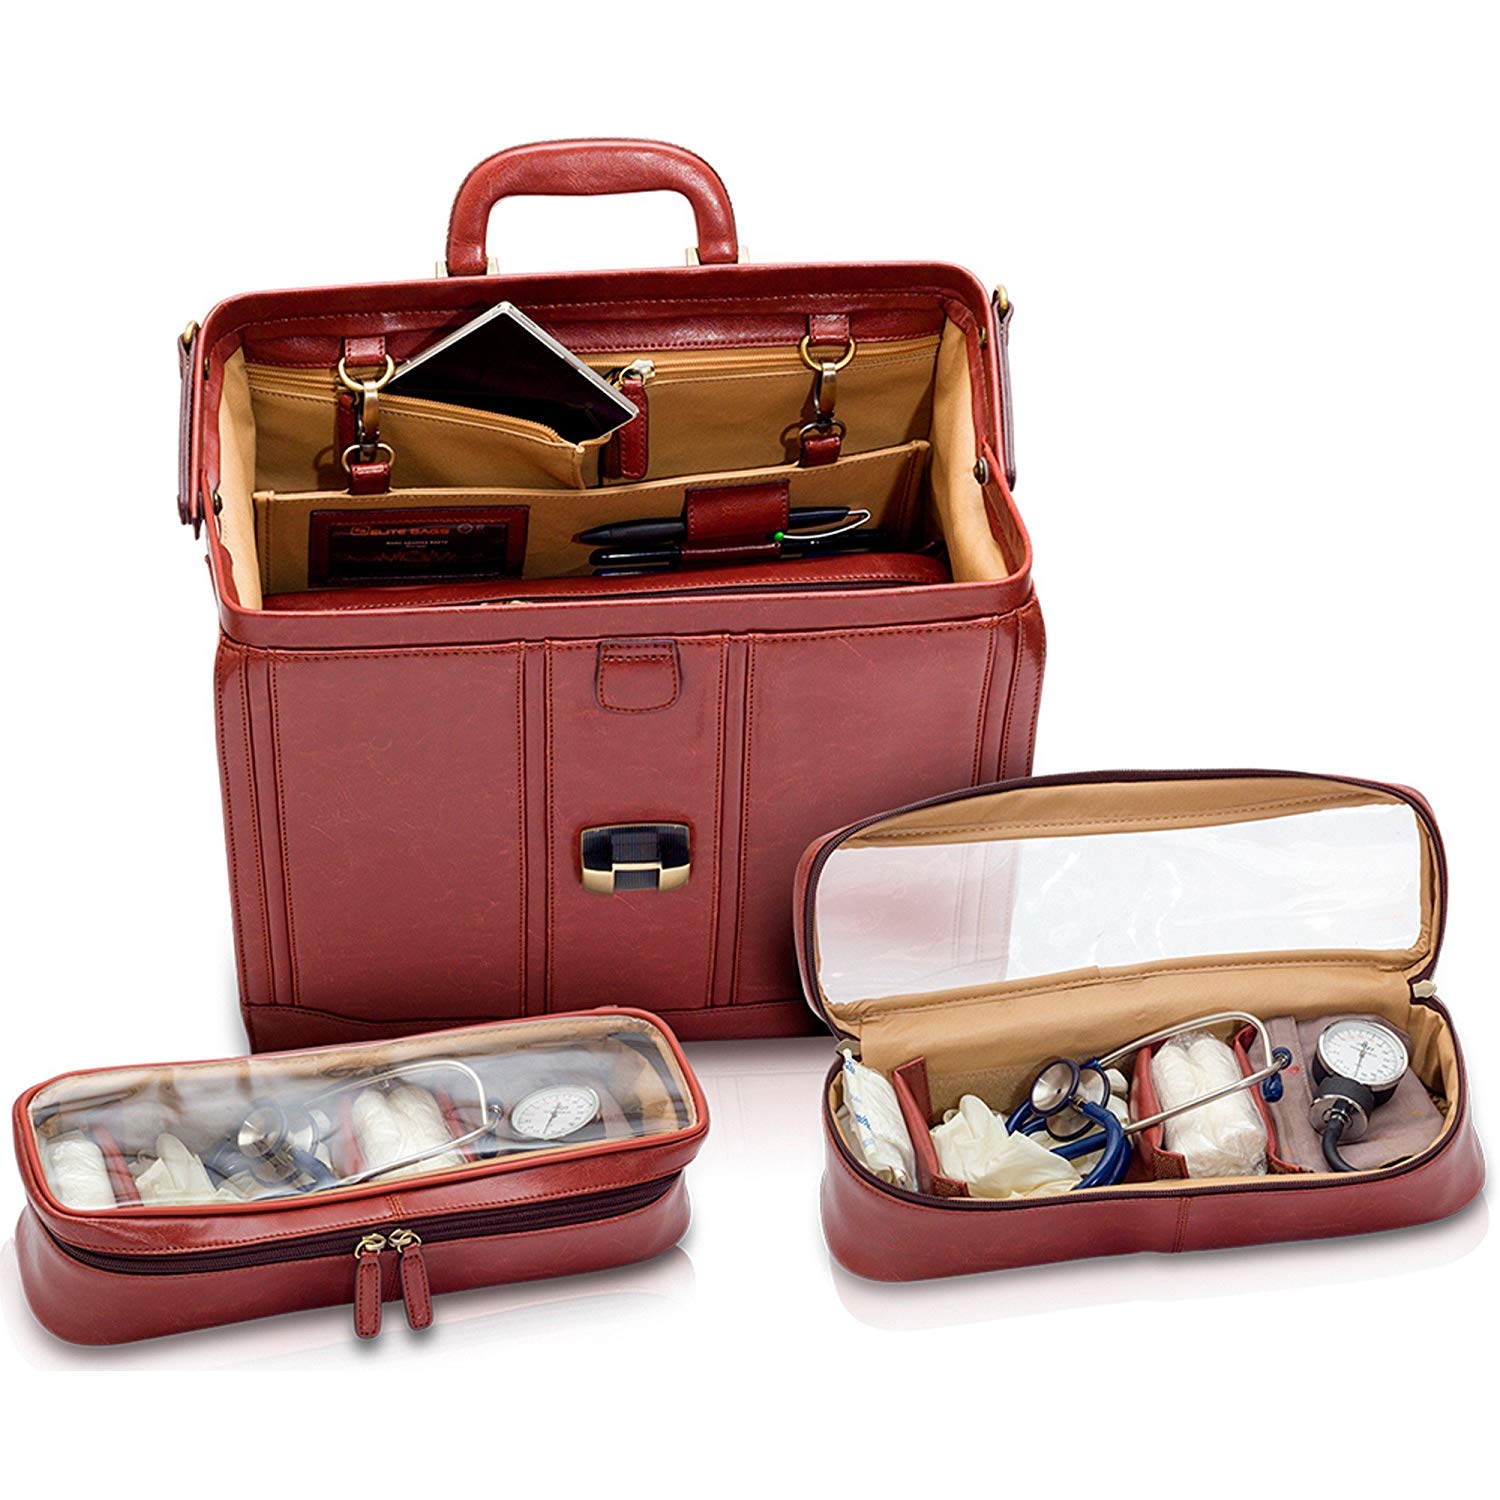 This leather doctor's bag is ultra-functional, with ampoule holders, designed by Elite bag.